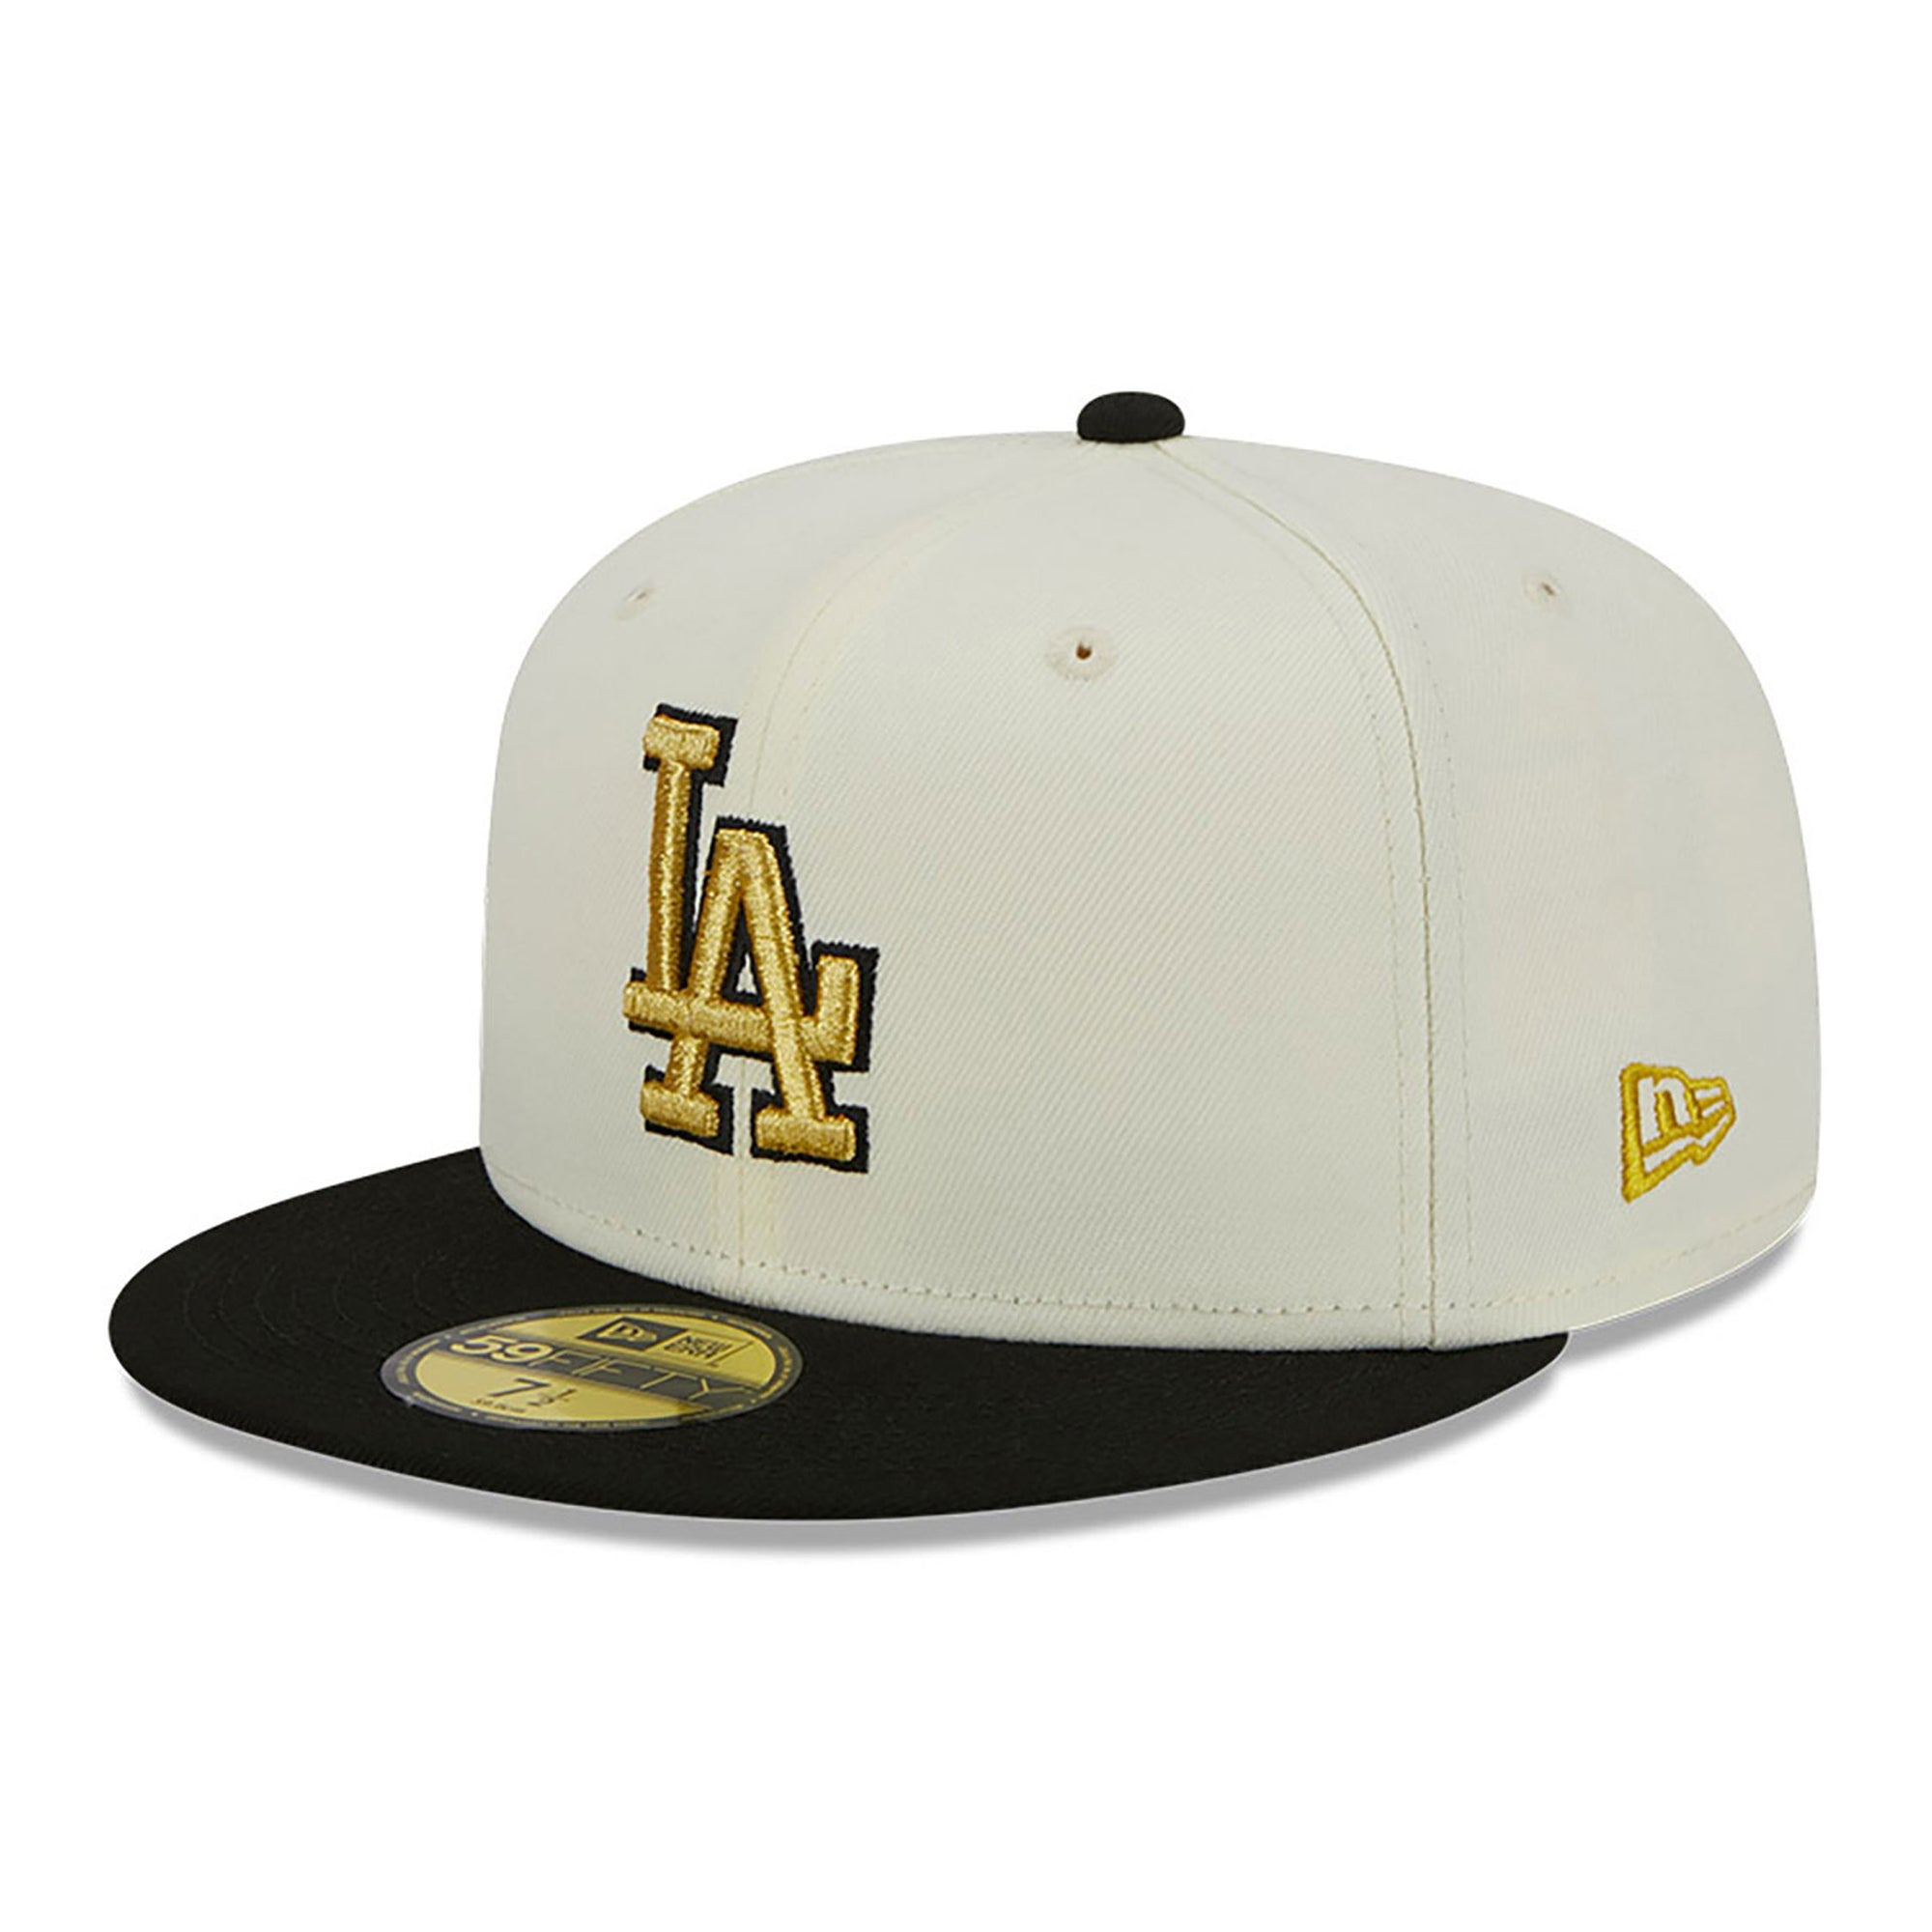 Los Angeles Dodgers New Era Black & White 59FIFTY Fitted Hat - Black 7 1/2